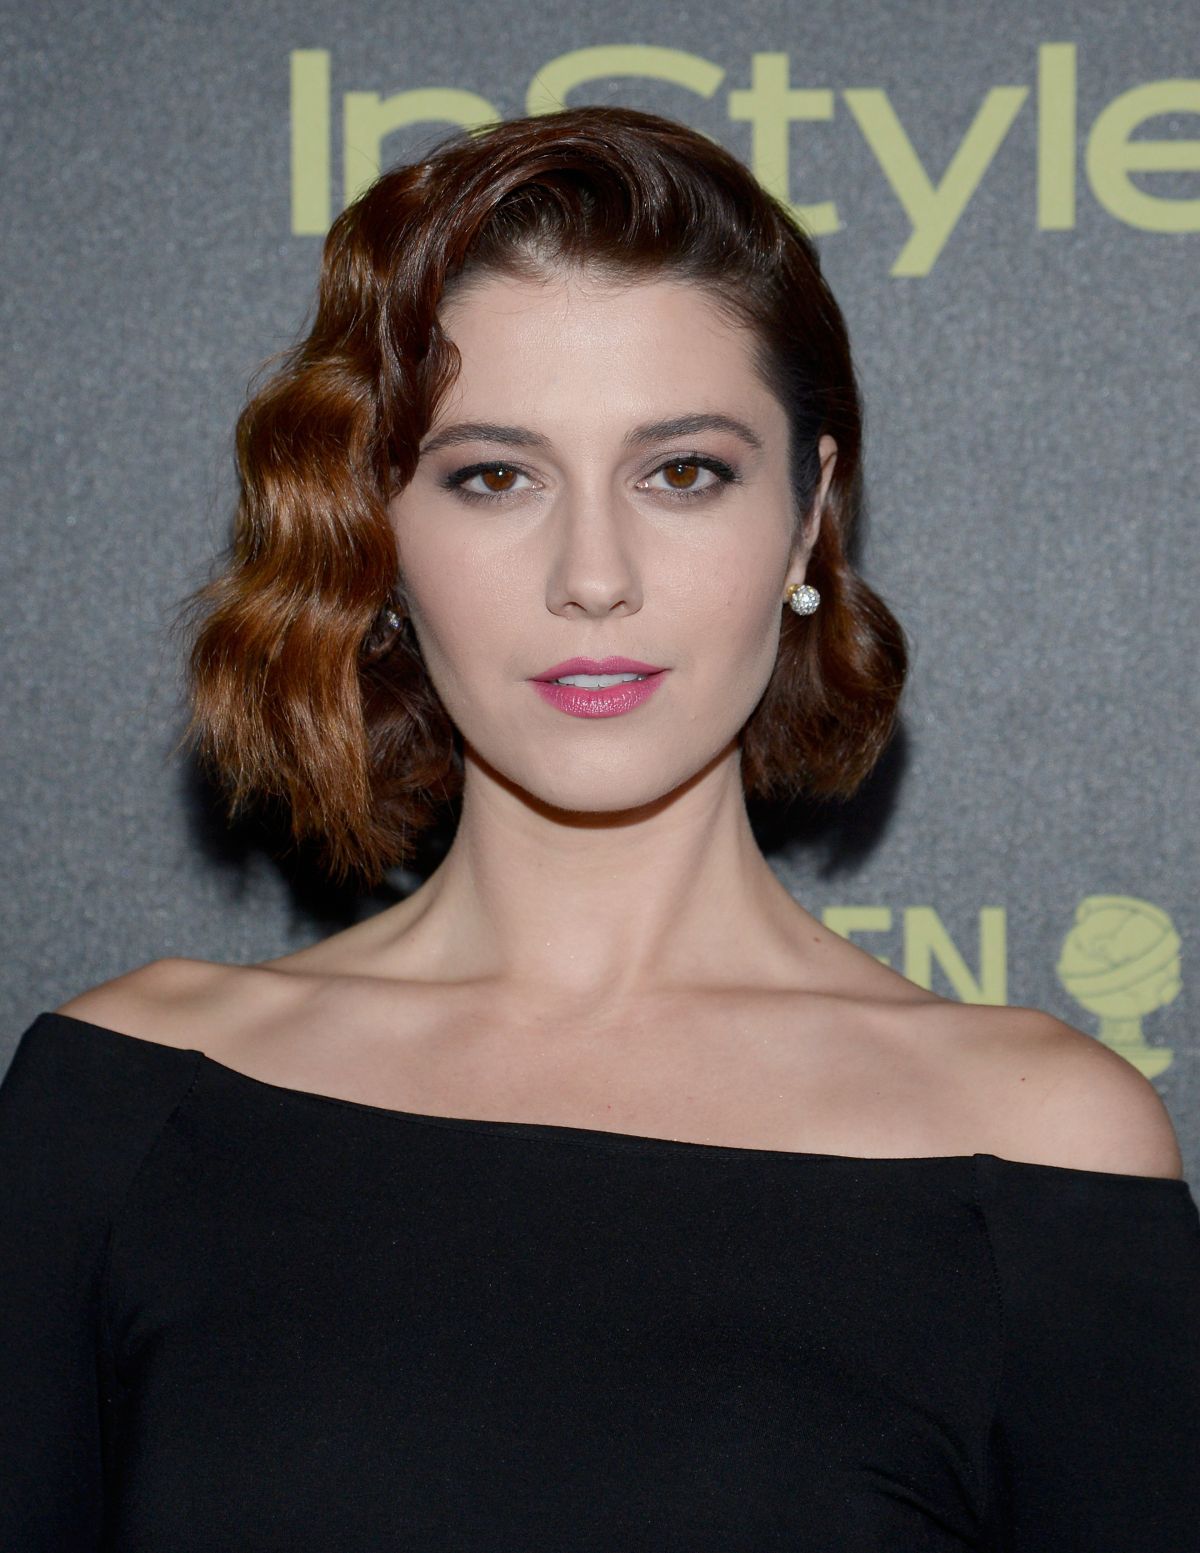 mary-elizabeth-winstead-at-hfpa-and-instyle-celebrate-2016-golden-globe-award-season-in-west-hollywood-11-17-2015_1.jpg